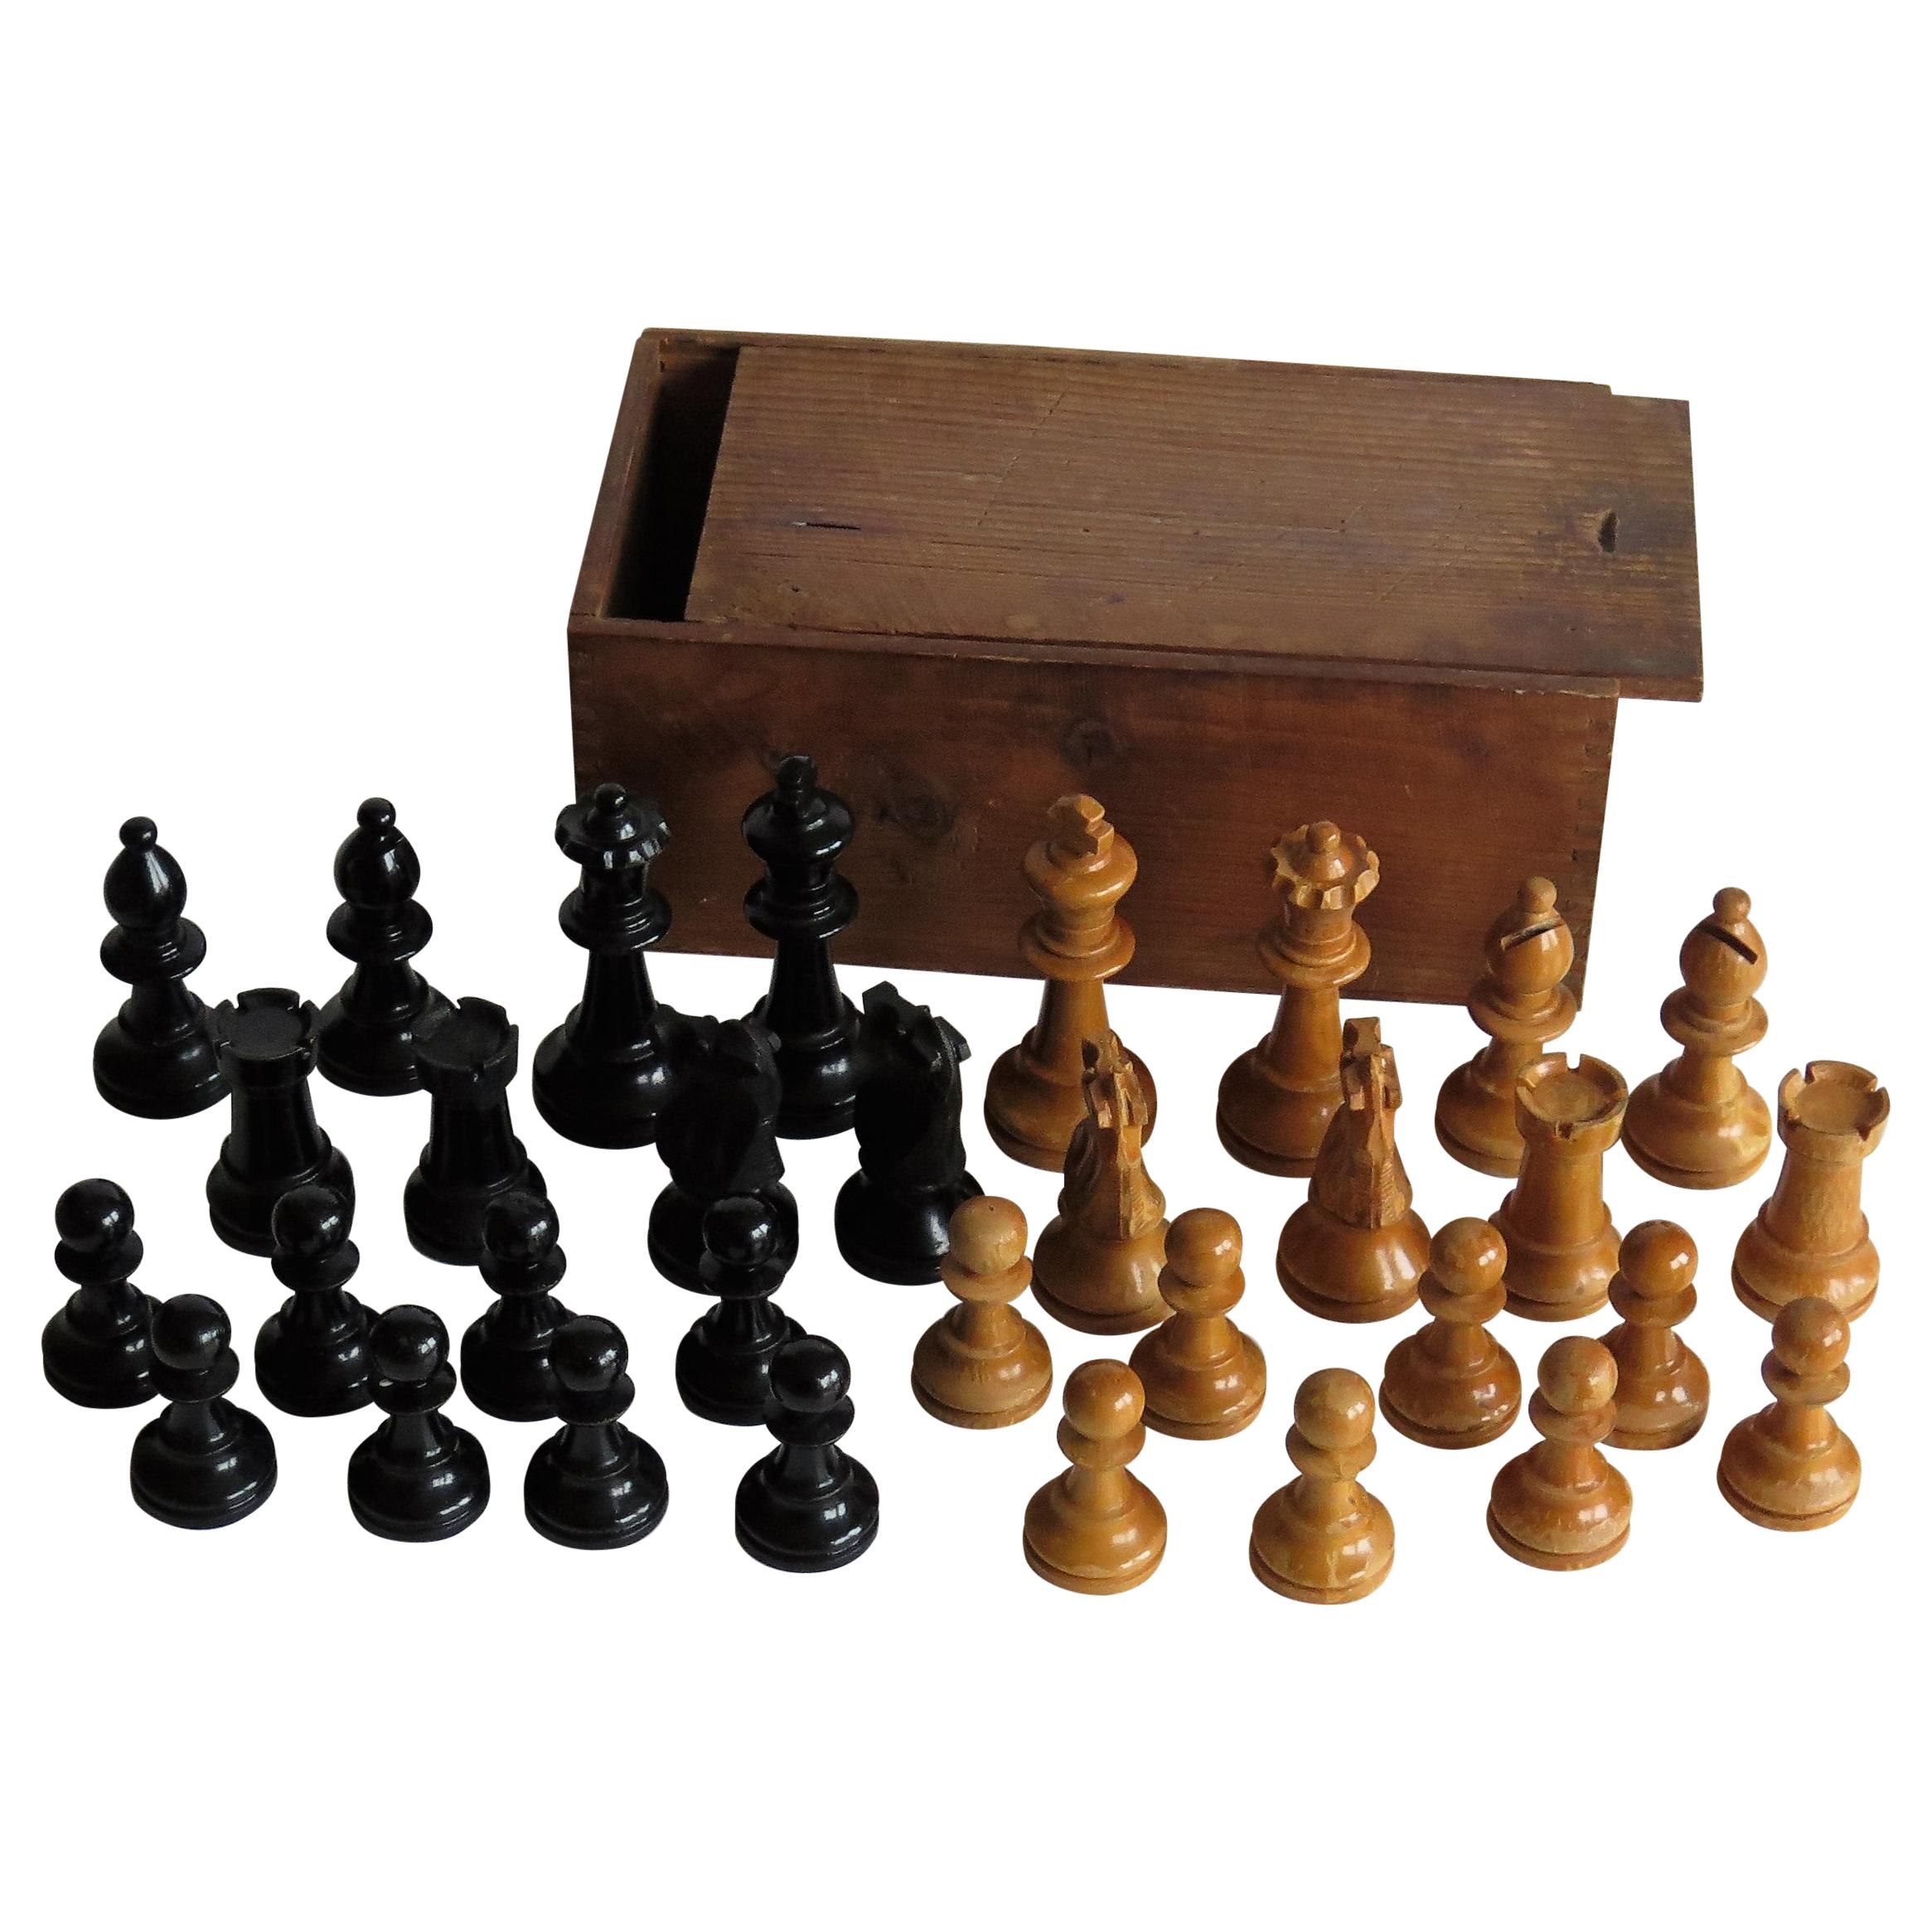 Handmade Hardwood Weighted Club Chess Set Pine Jointed Box 90 mm Kings, Ca 1920 